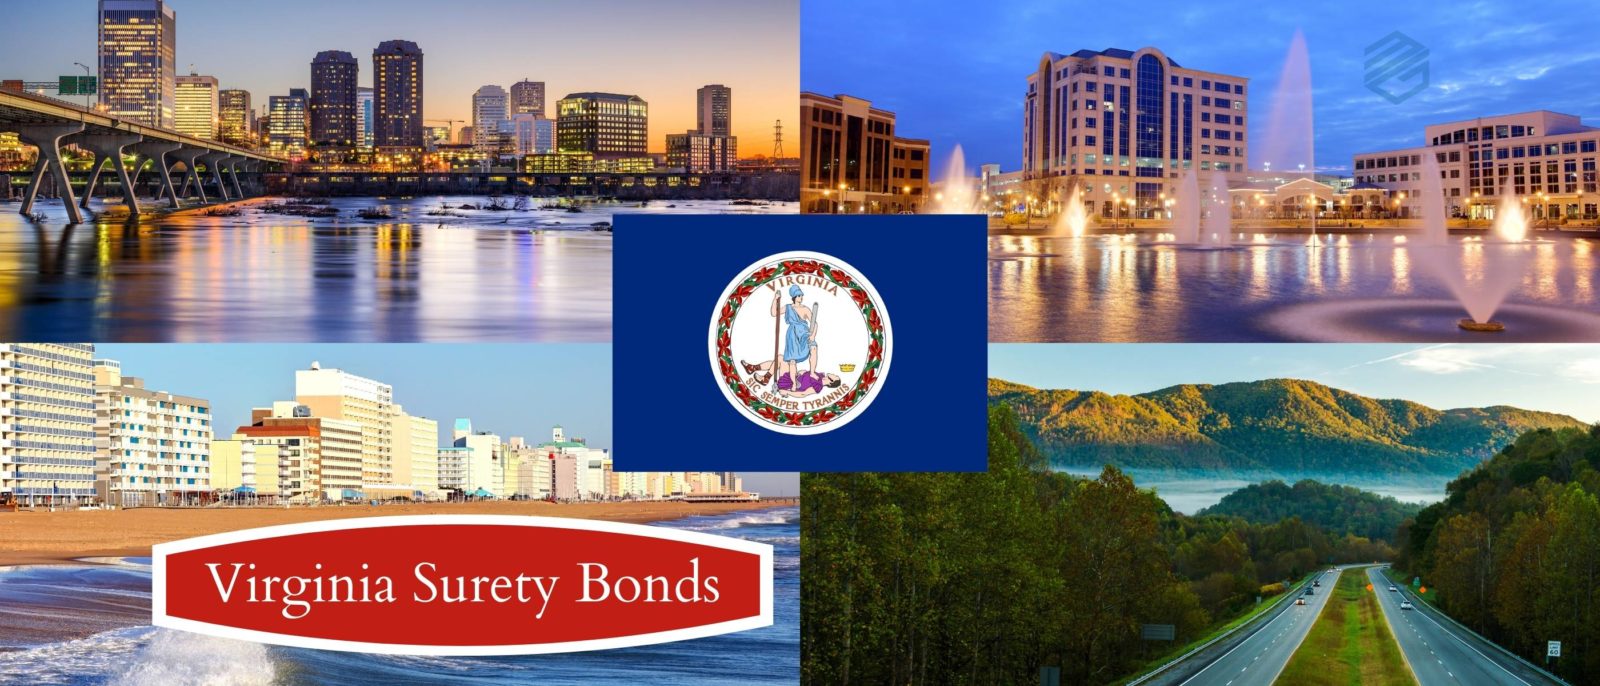 Virginia Surety Bonds - Five pictures representing Virginia including the state flag, Virginia Beach, Richmond, Newport and the mountains. Text box that reads, "Virginia Surety Bonds".